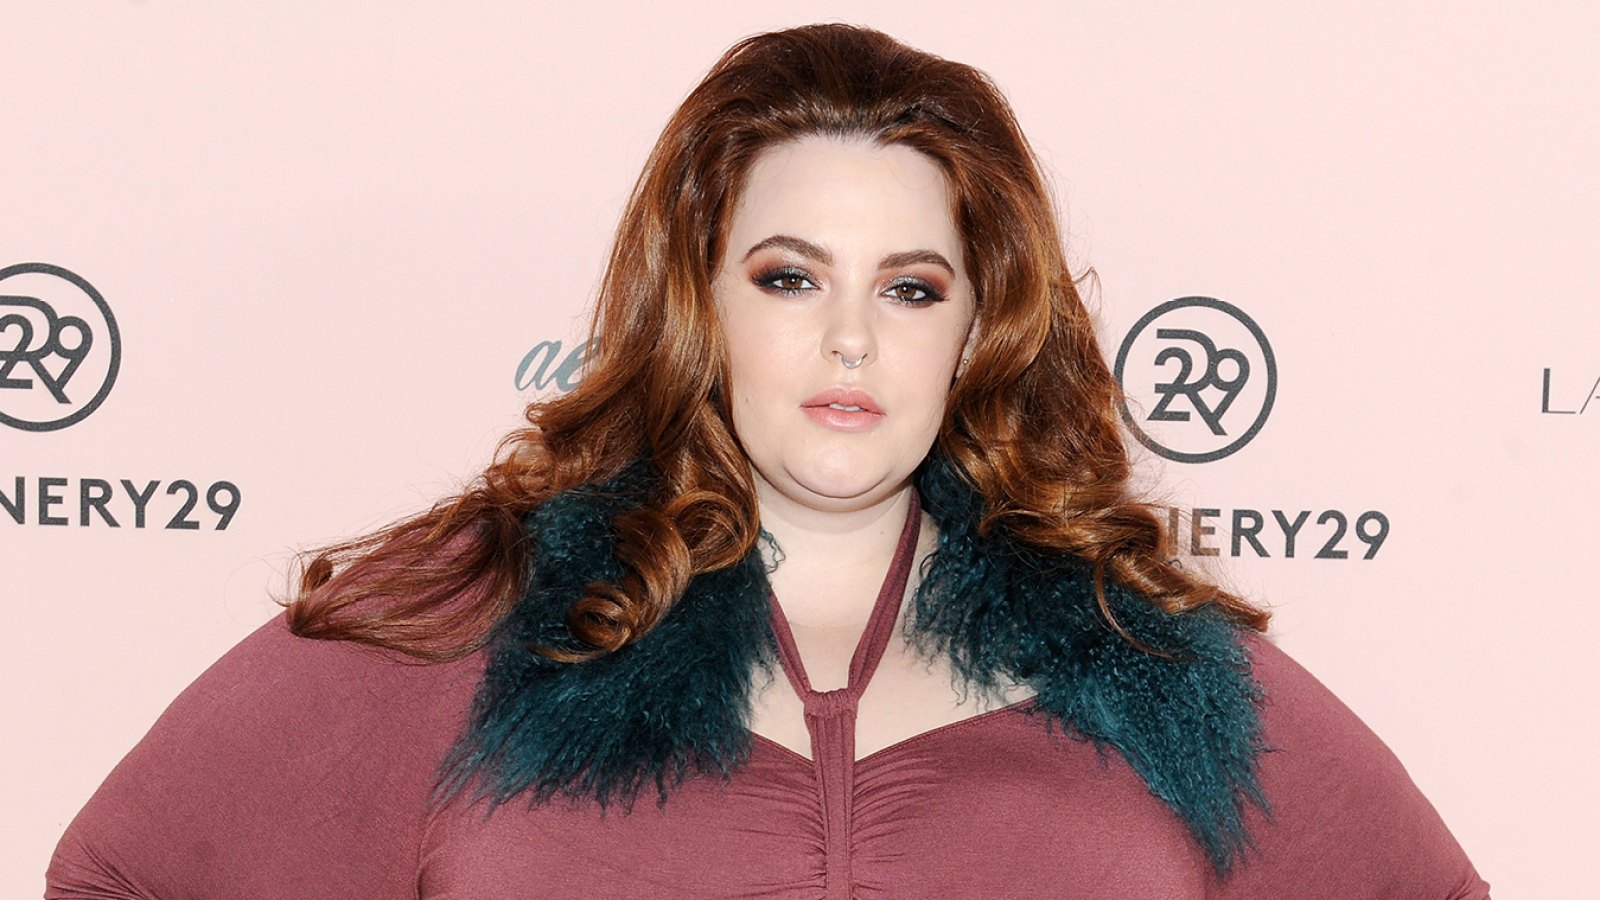 Tess Holliday Blasts Man for Viral Post About 'Curvy Wife